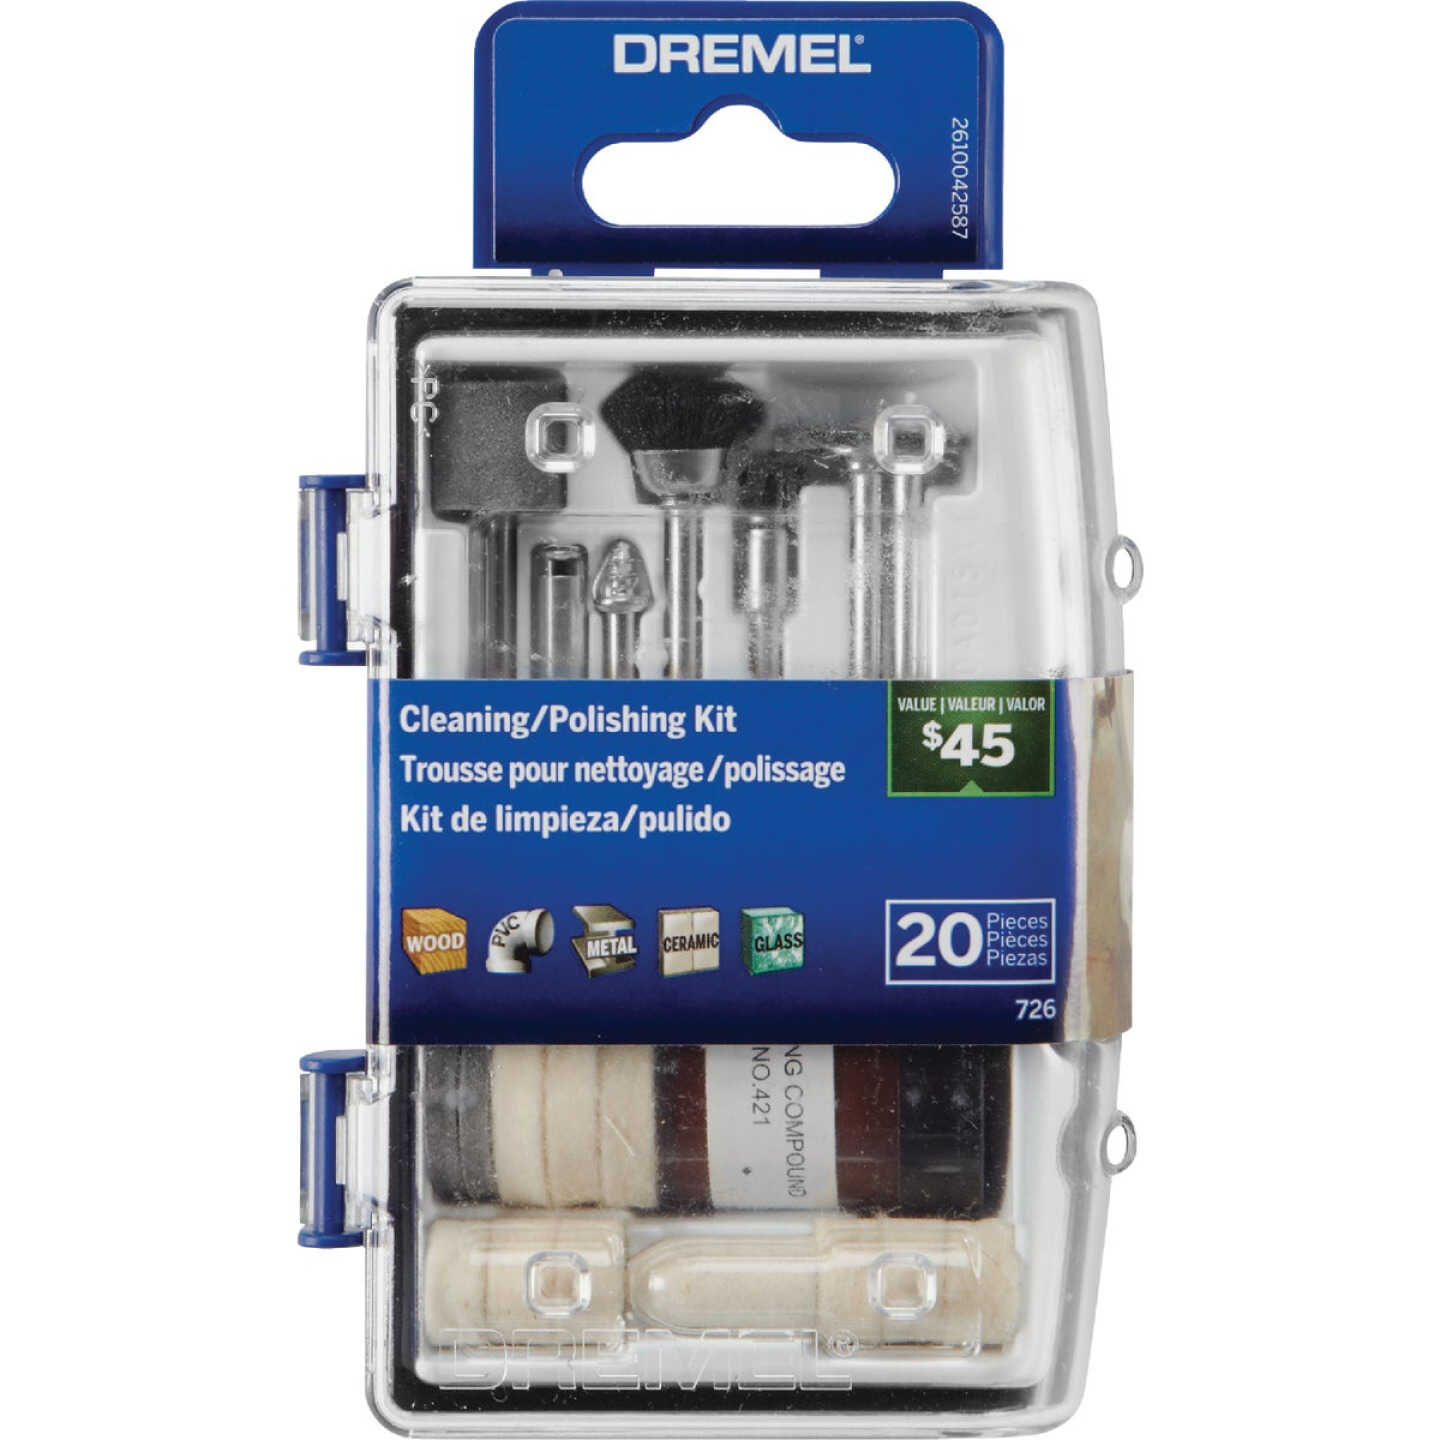 Dremel 684 20-Piece Cleaning And Polishing Rotary Tool Accessory Kit Polish  a Variety of Materials Clean Hard to Reach Areas